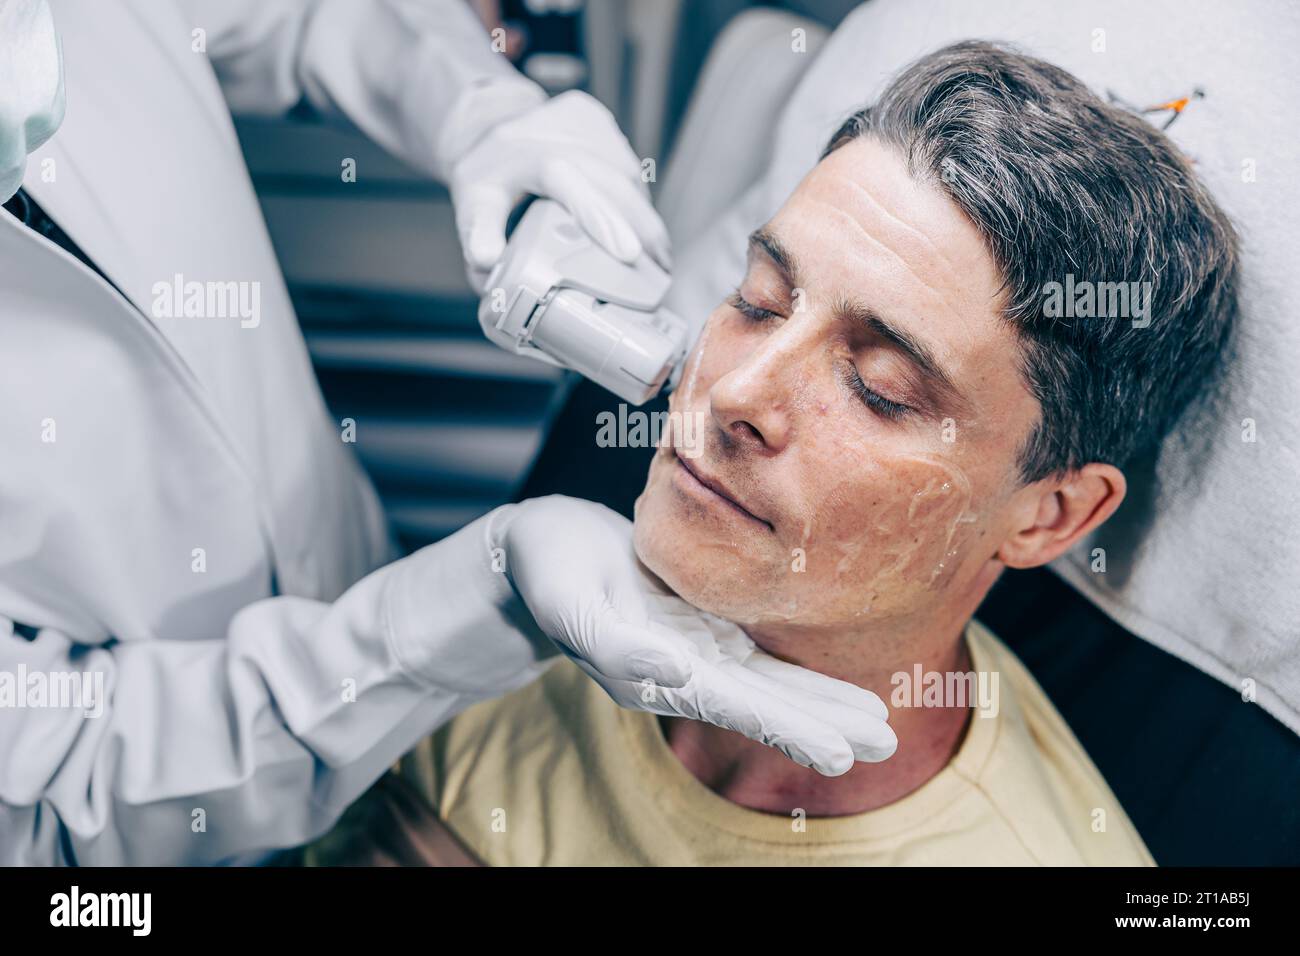 Skin doctor using laser resurfacing facial skincare treatment technology with adult male to reduce wrinkles and scars at anti aging clinic Stock Photo